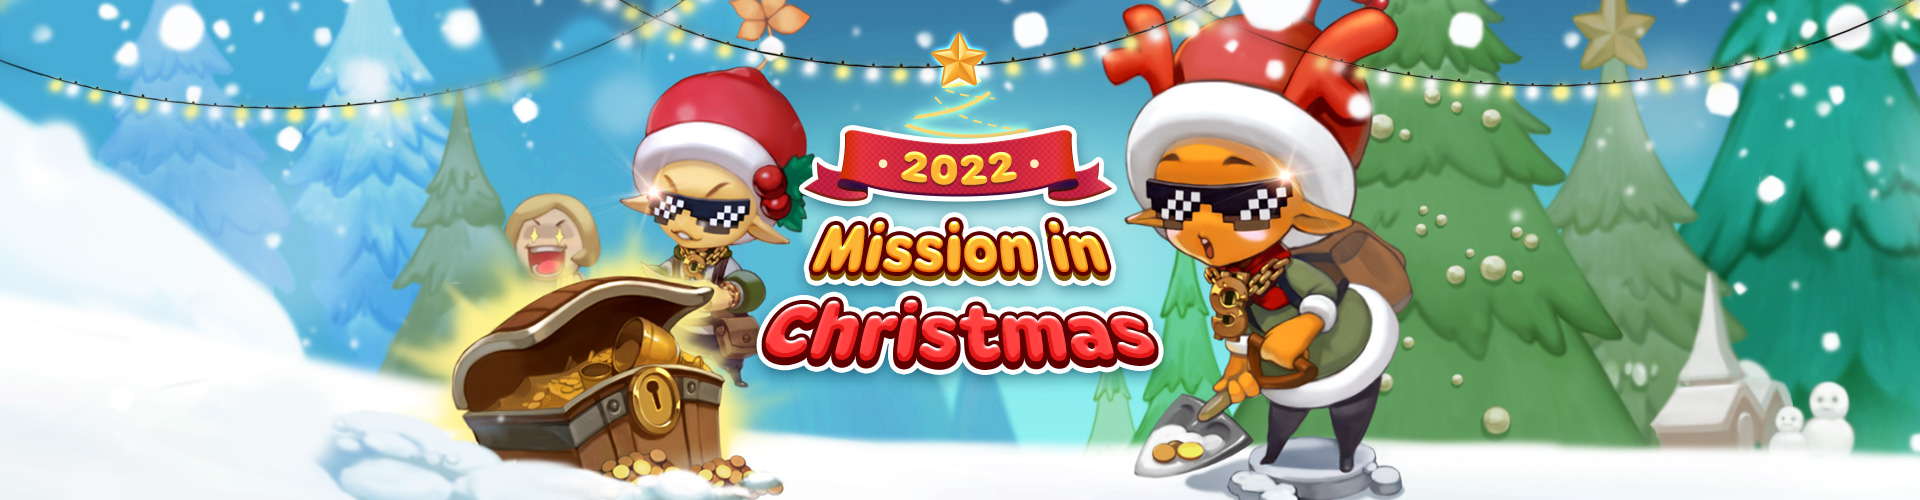 Mission in Christmas